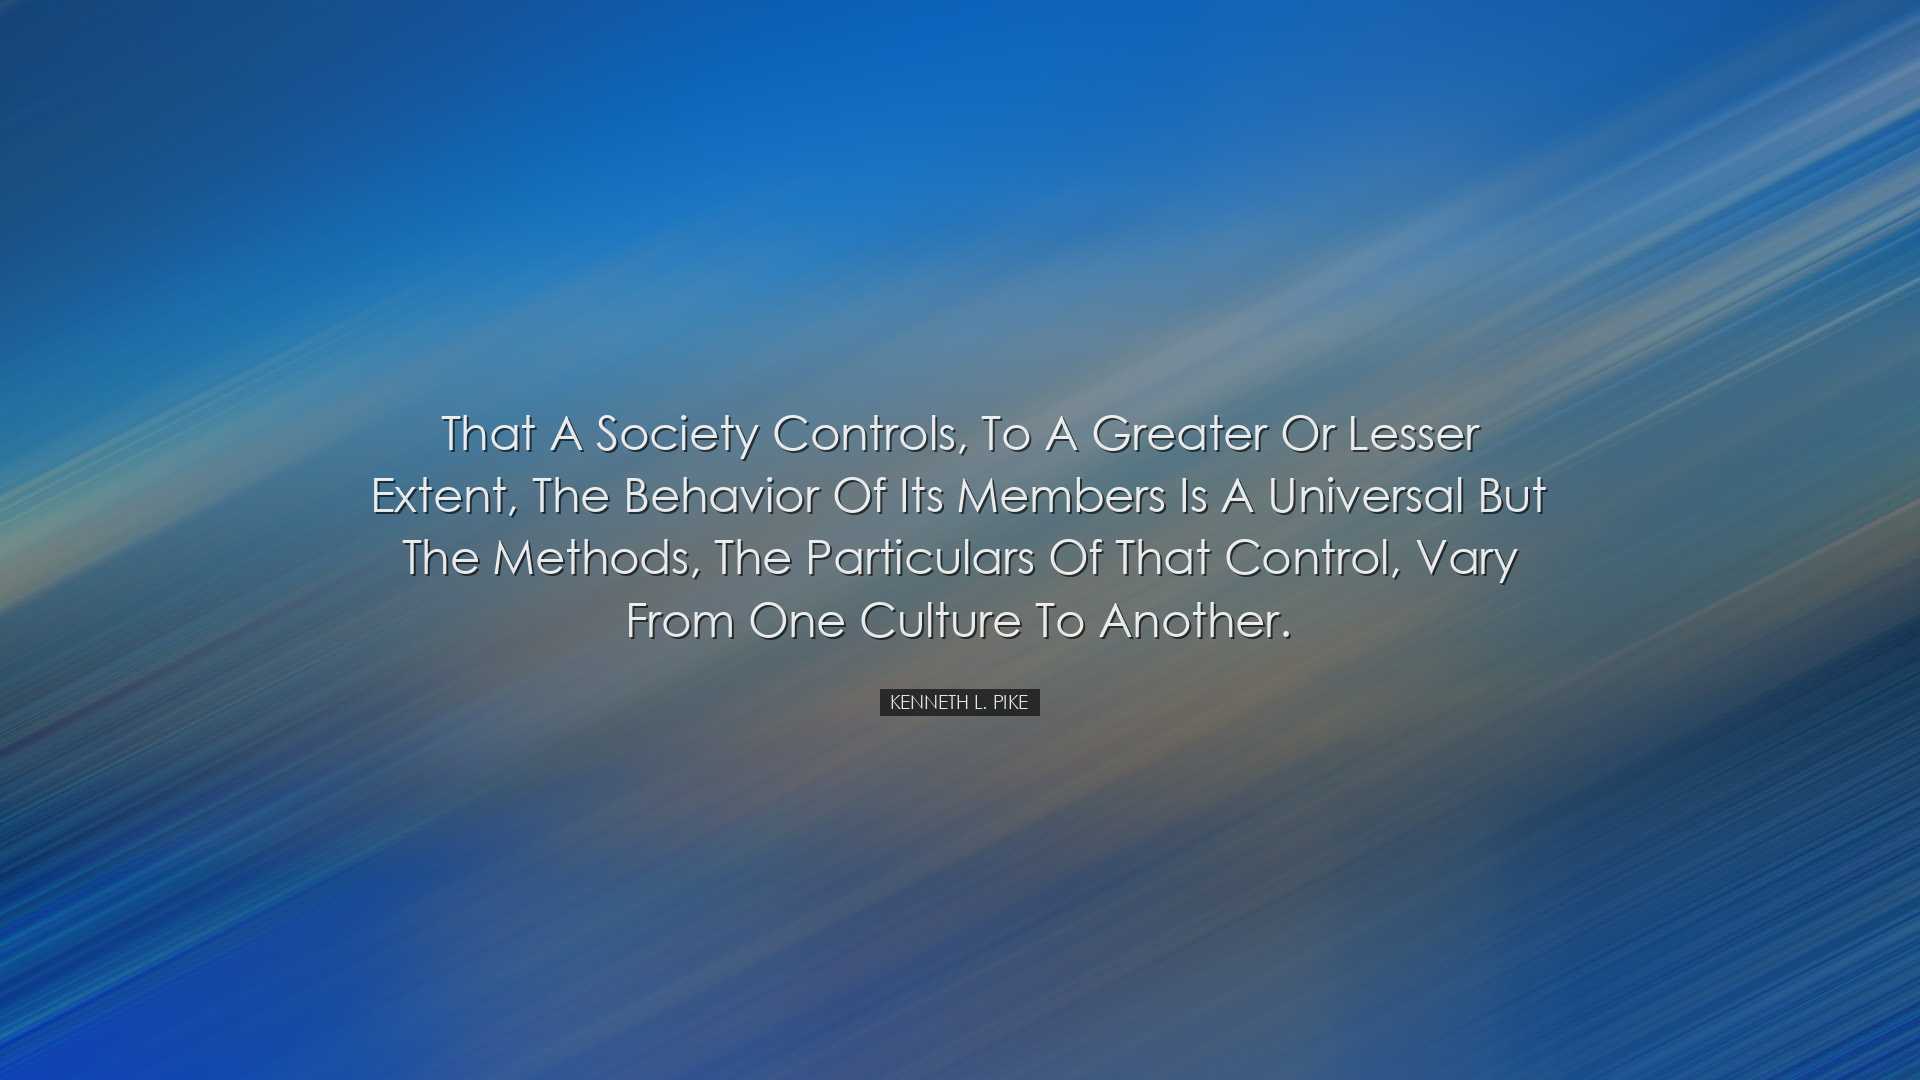 That a society controls, to a greater or lesser extent, the behavi